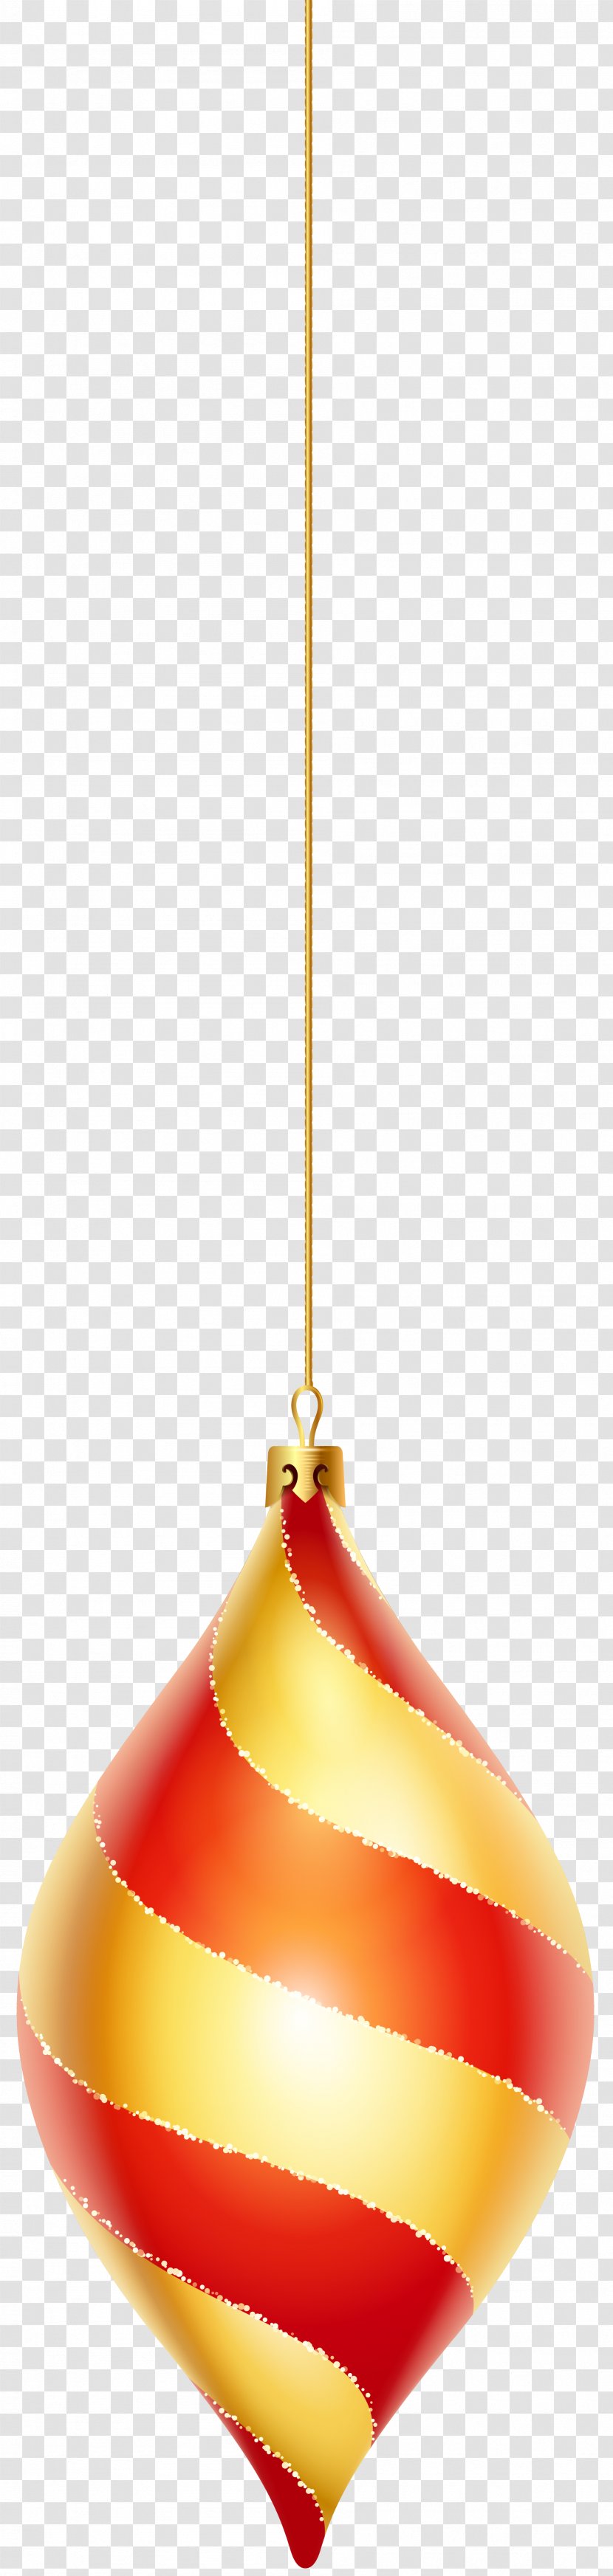 Red Lighting - Christmas Ornament Clip Art Transparent PNG